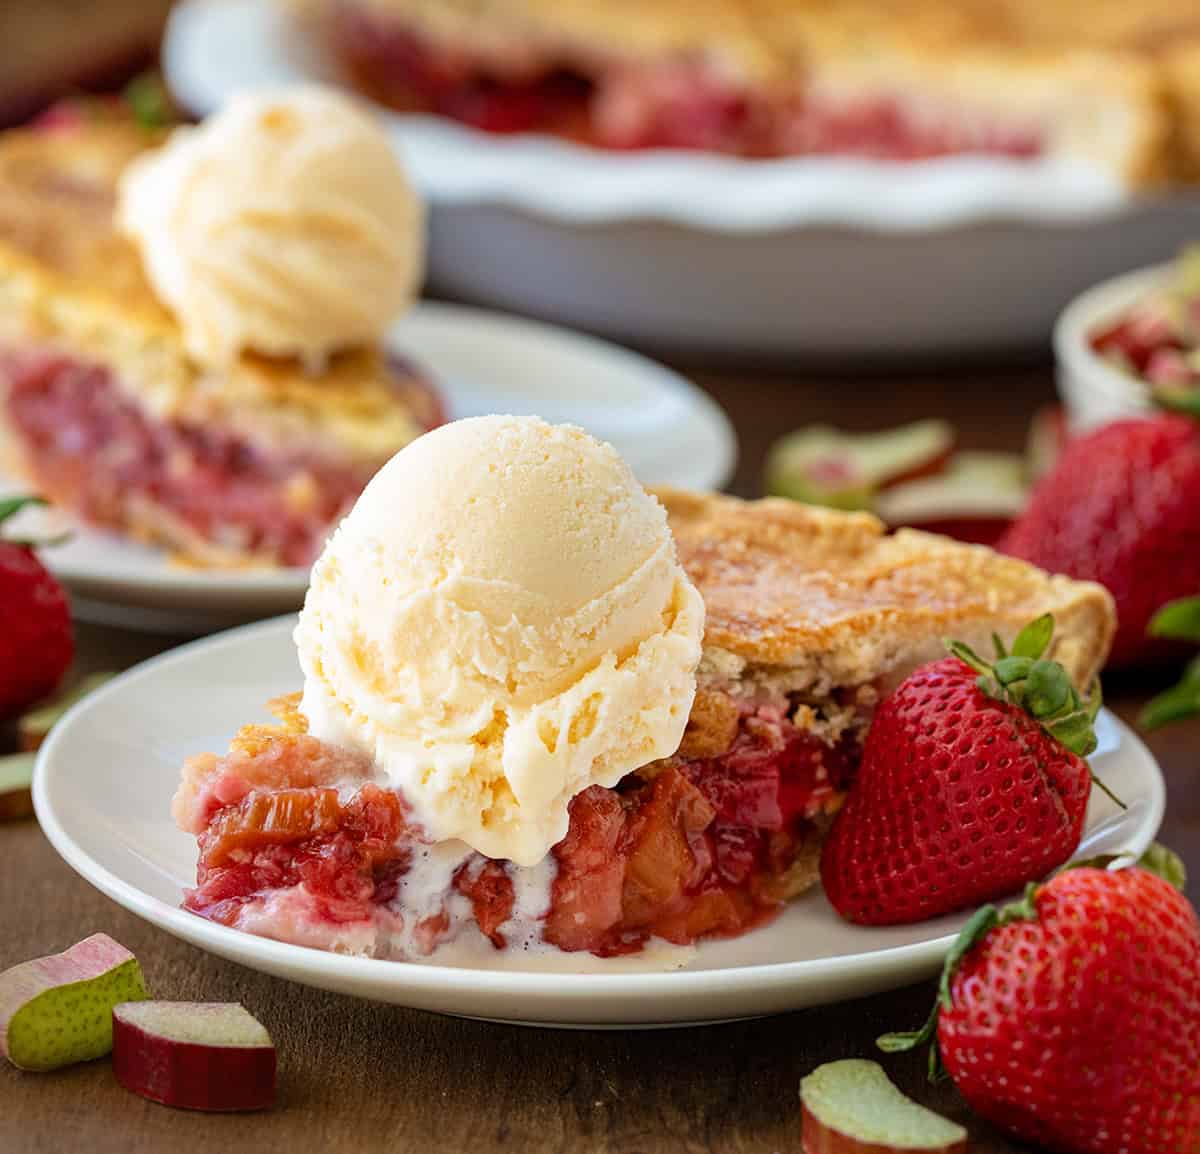 Pieces of Strawberry Rhubarb Pie on plates on a wooden table with strawberries around.